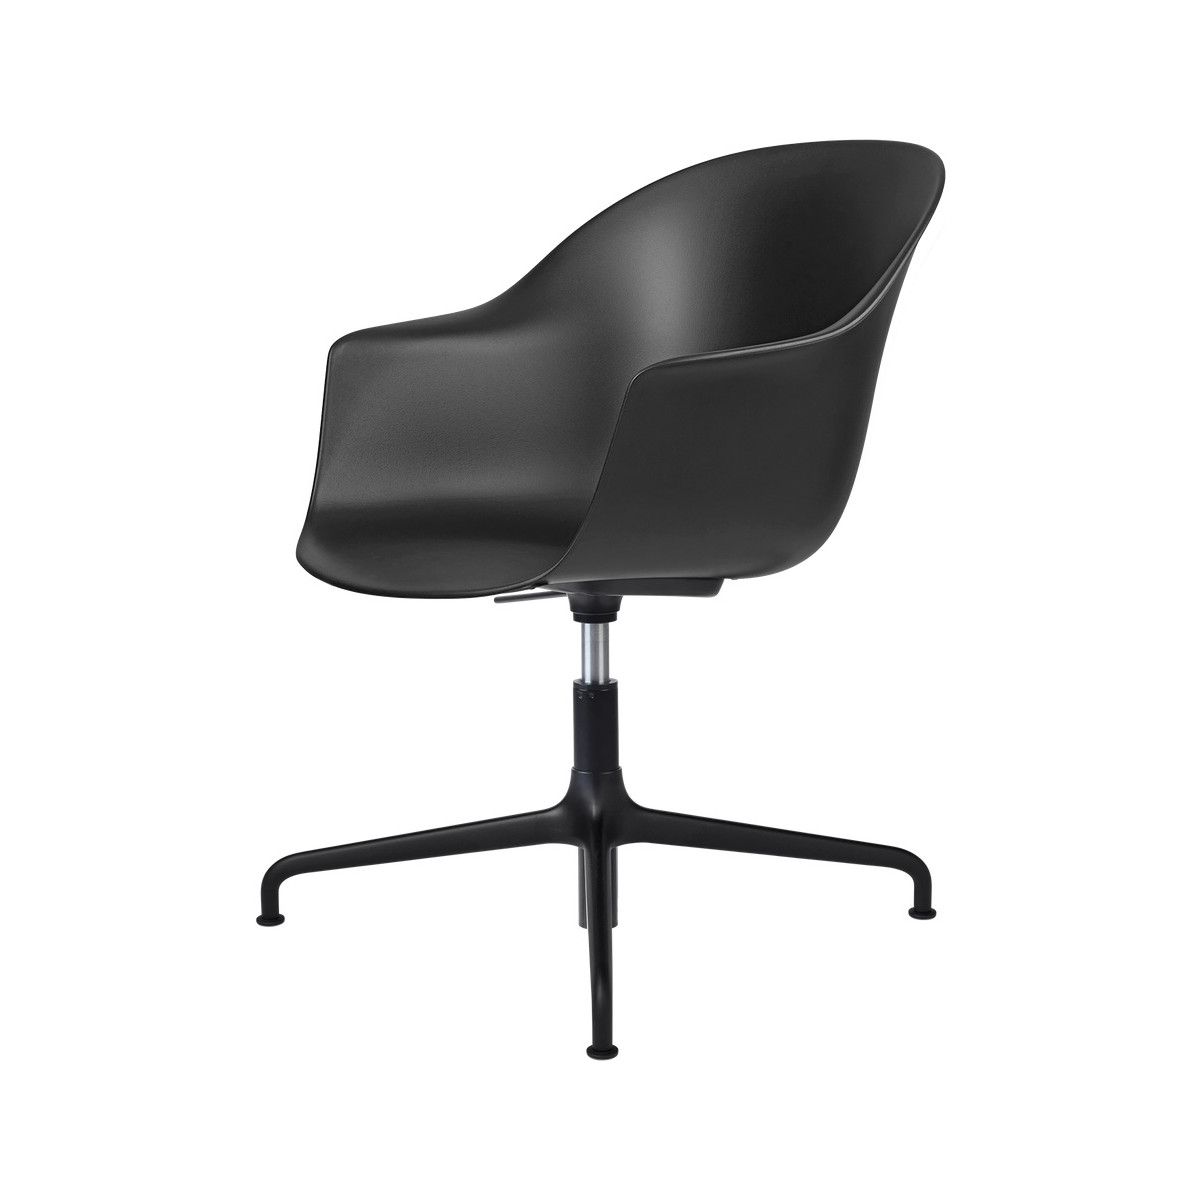 Bat Meeting chair, Height Adjustable – Without castors – Black shell